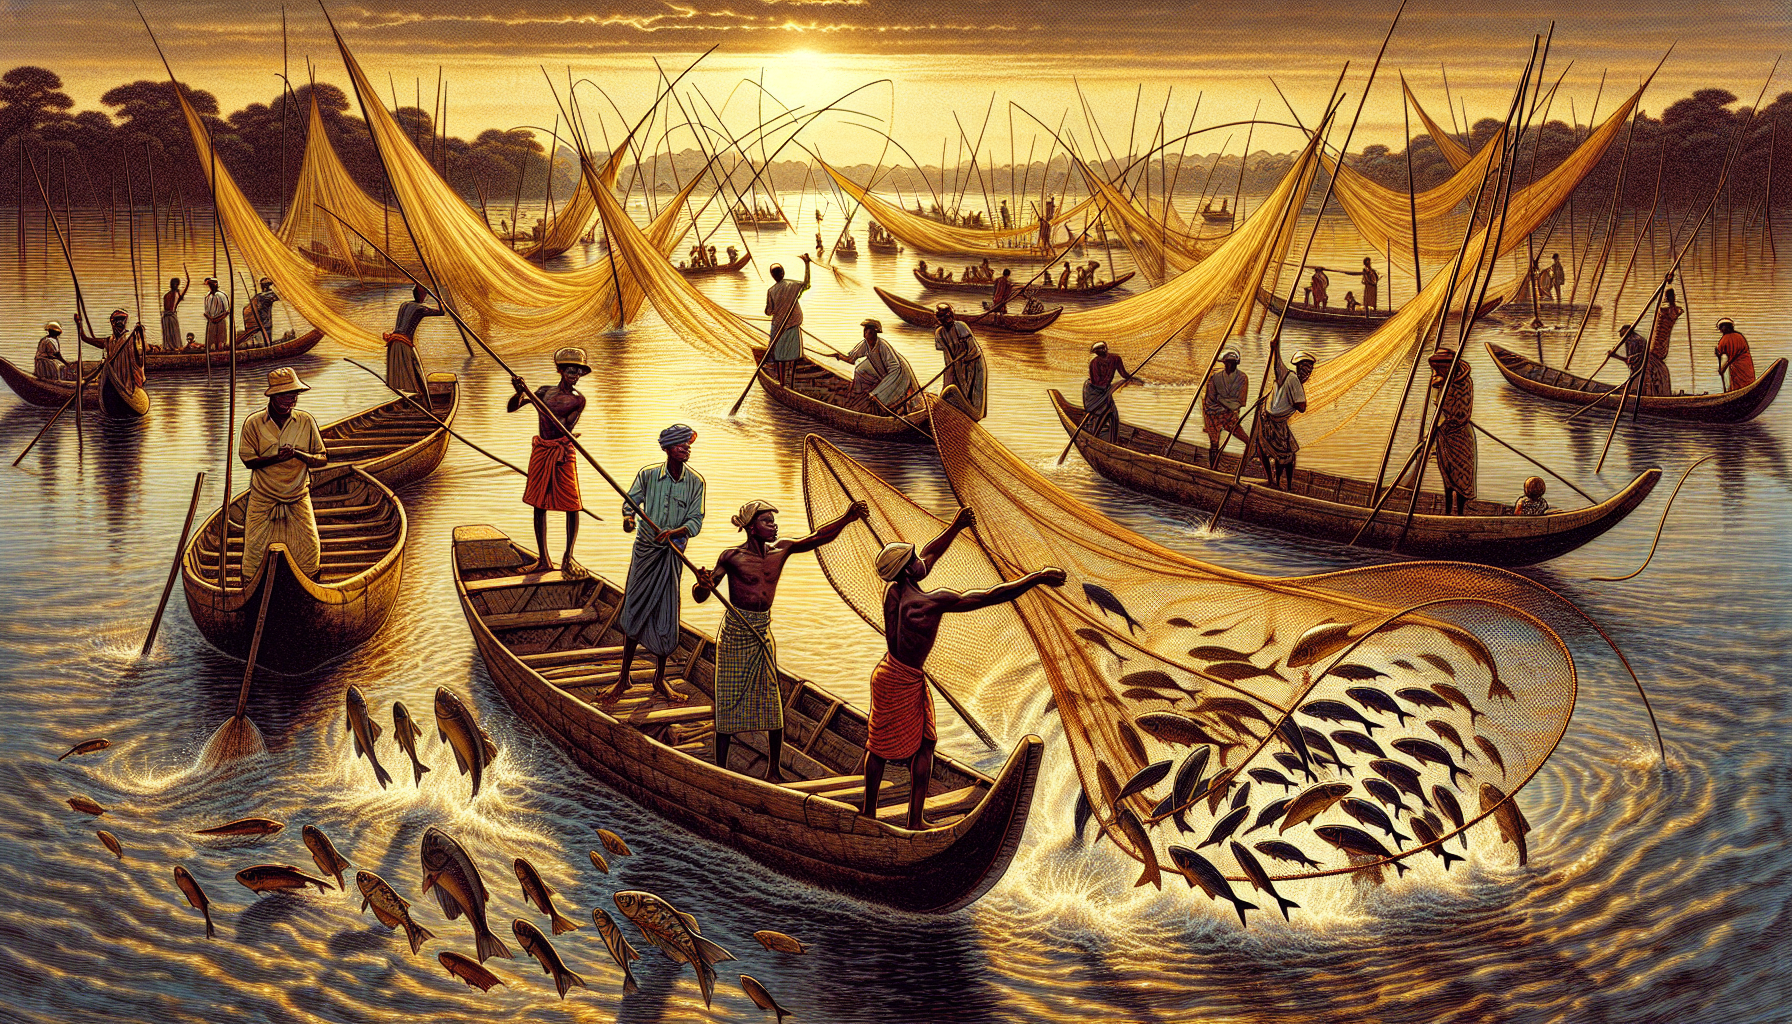 A lively illustration of a traditional Congolese fishing scene with fishermen on wooden boats catching fish in the Congo River